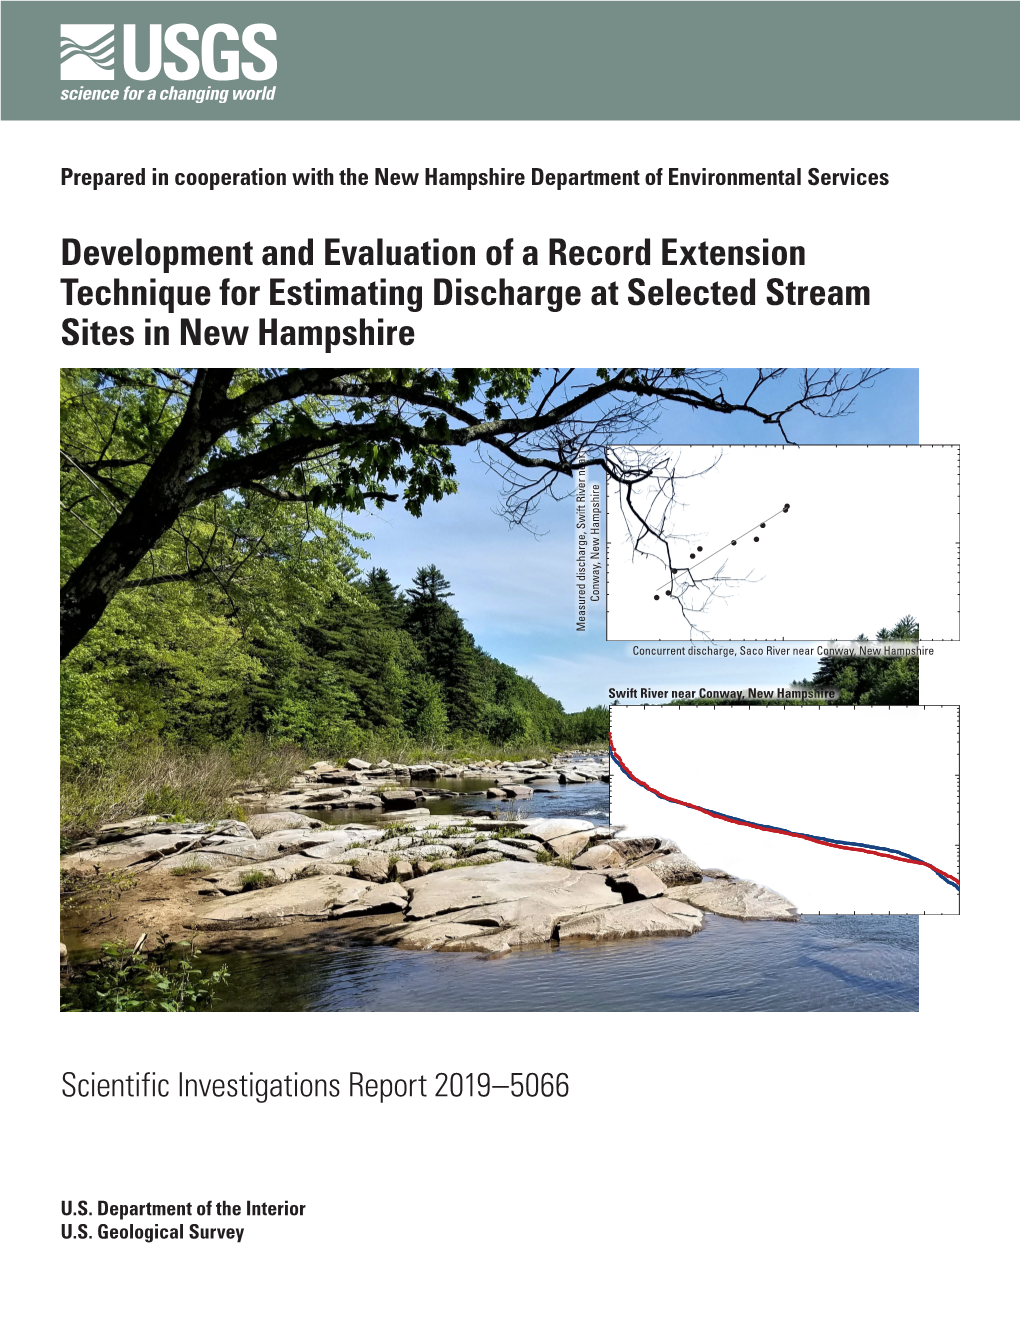 Development and Evaluation of a Record Extension Technique for Estimating Discharge at Selected Stream Sites in New Hampshire